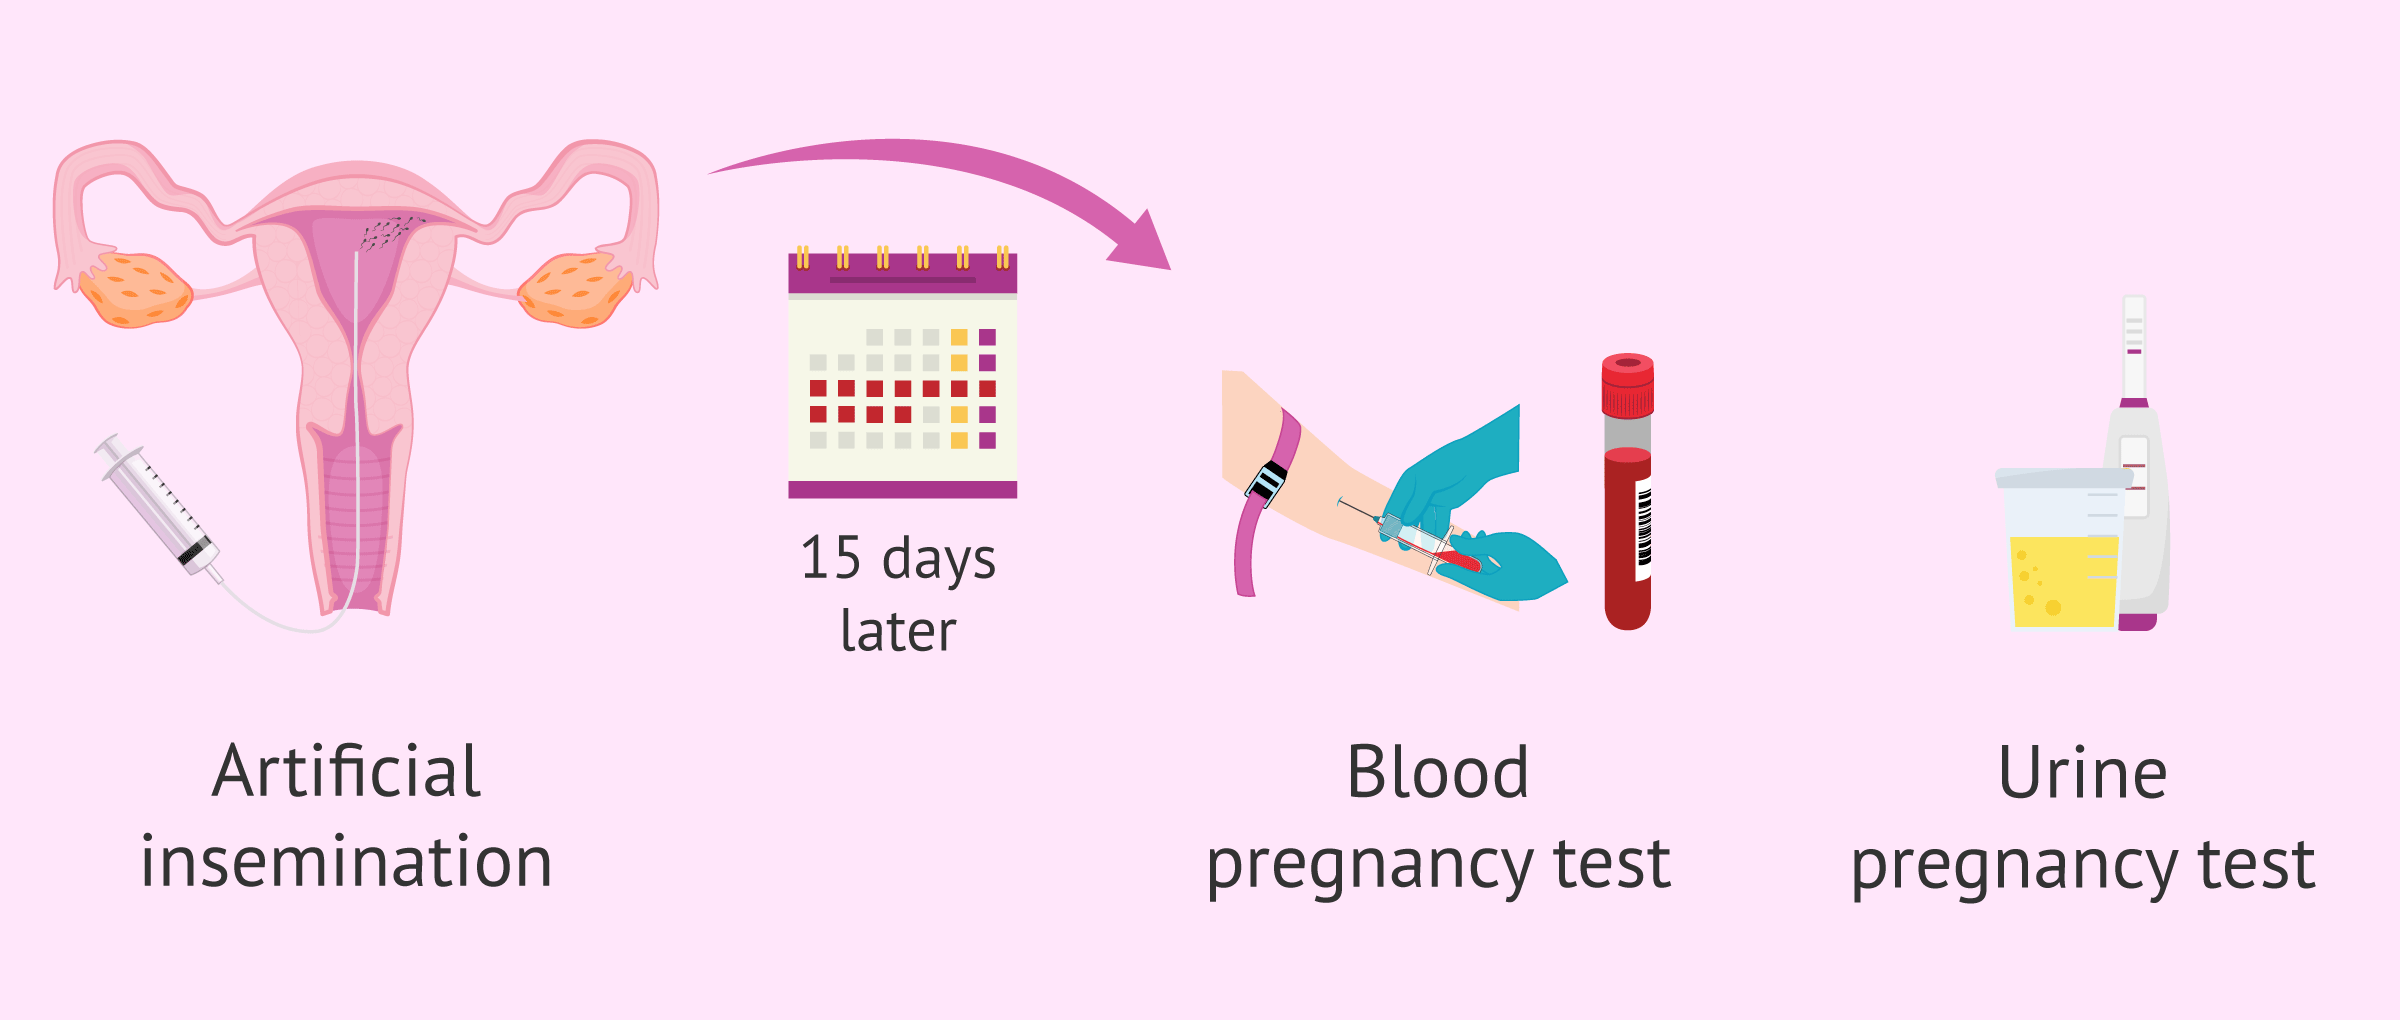 Waiting time for pregnancy test